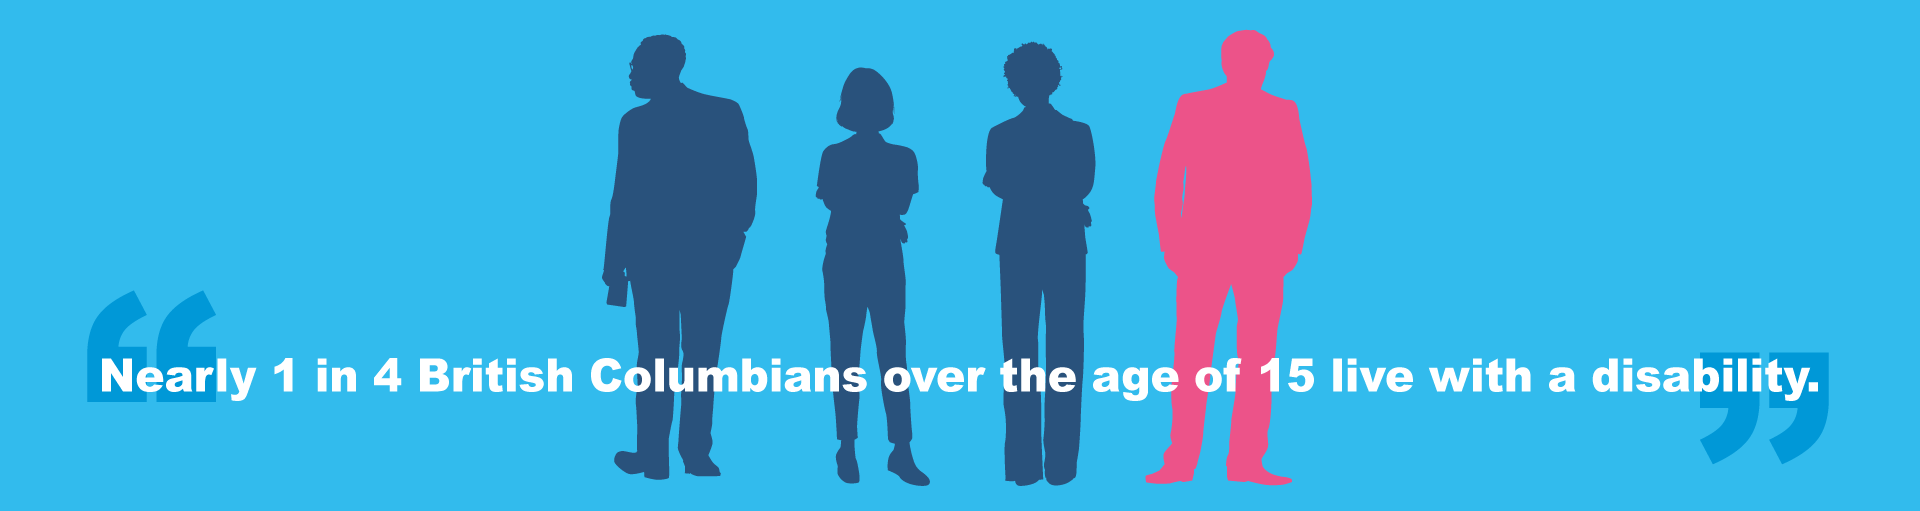 Graphic silhouettes of 4 people, three people are coloured blue and one person is coloured pink to show a statistic that 1 in 4 people in BC live with a disability.